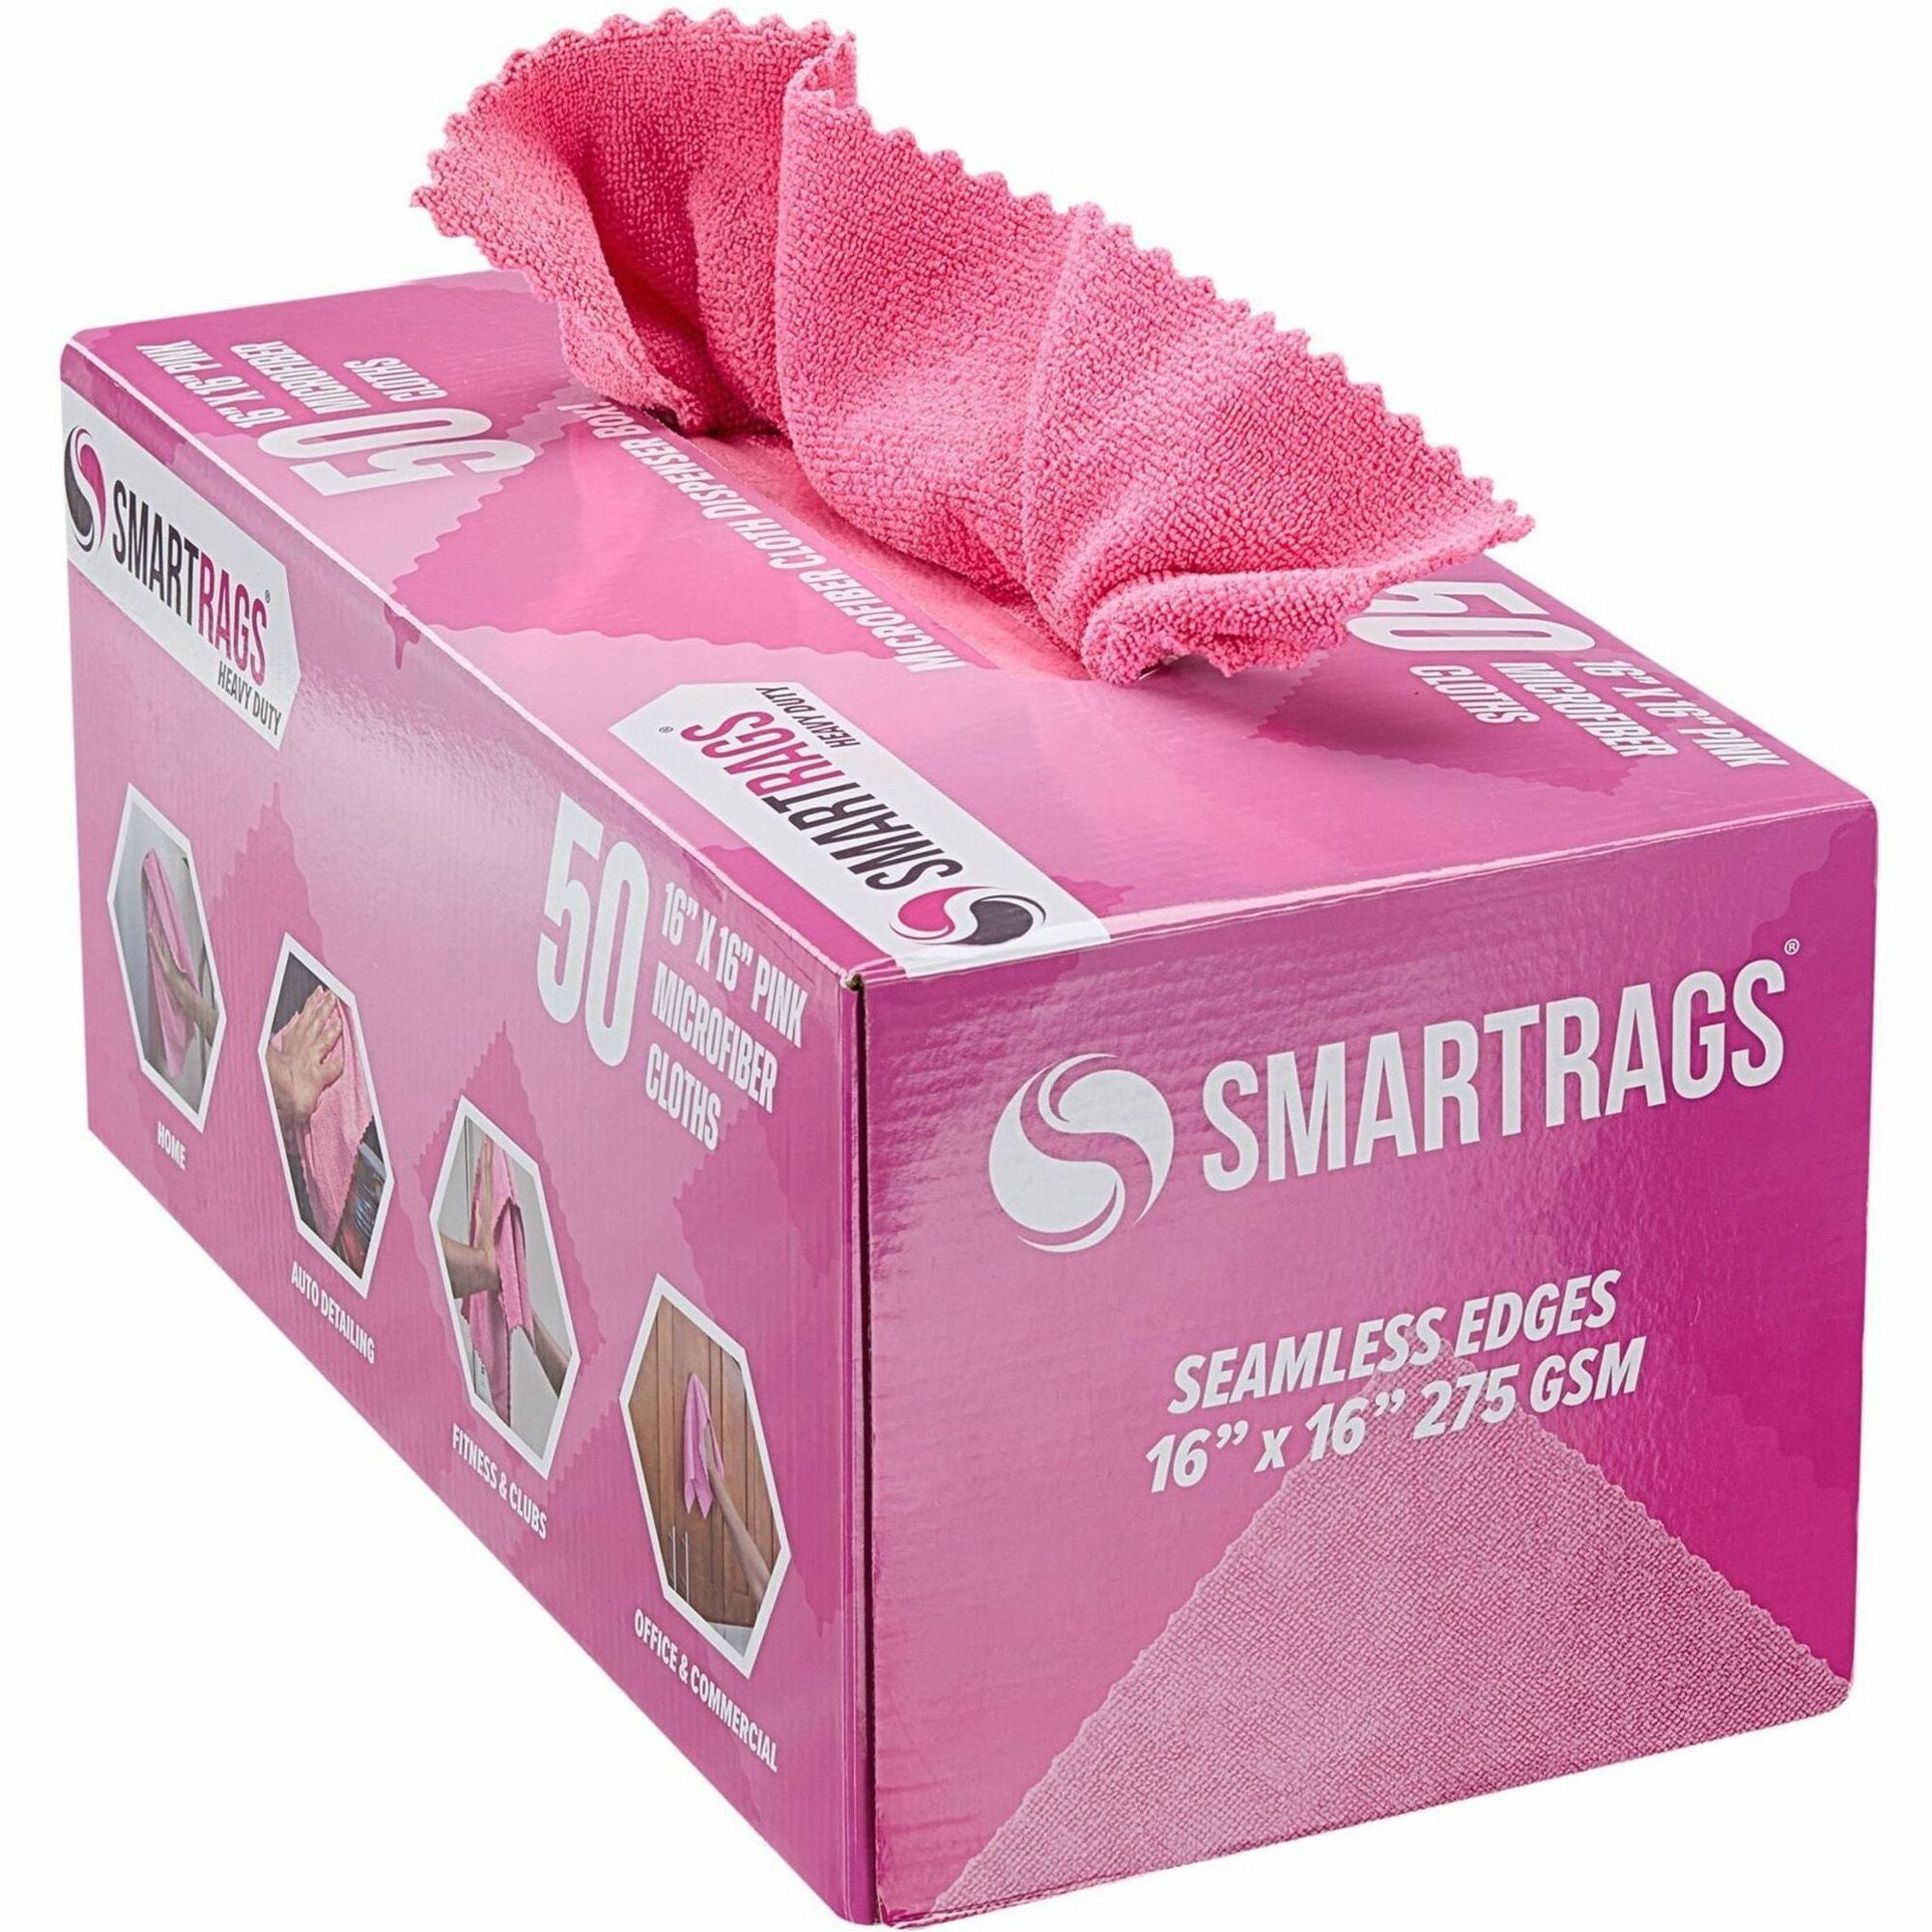 monarch-smart-rags-microfiber-cloths-for-institutional-automotive-office-healthcare-household-garage-breakroom-factory-hospital-50-box-heavy-duty-reusable-streak-free-lint-free-dirt-resistant-grime-resistant-pink_monm930p - 1